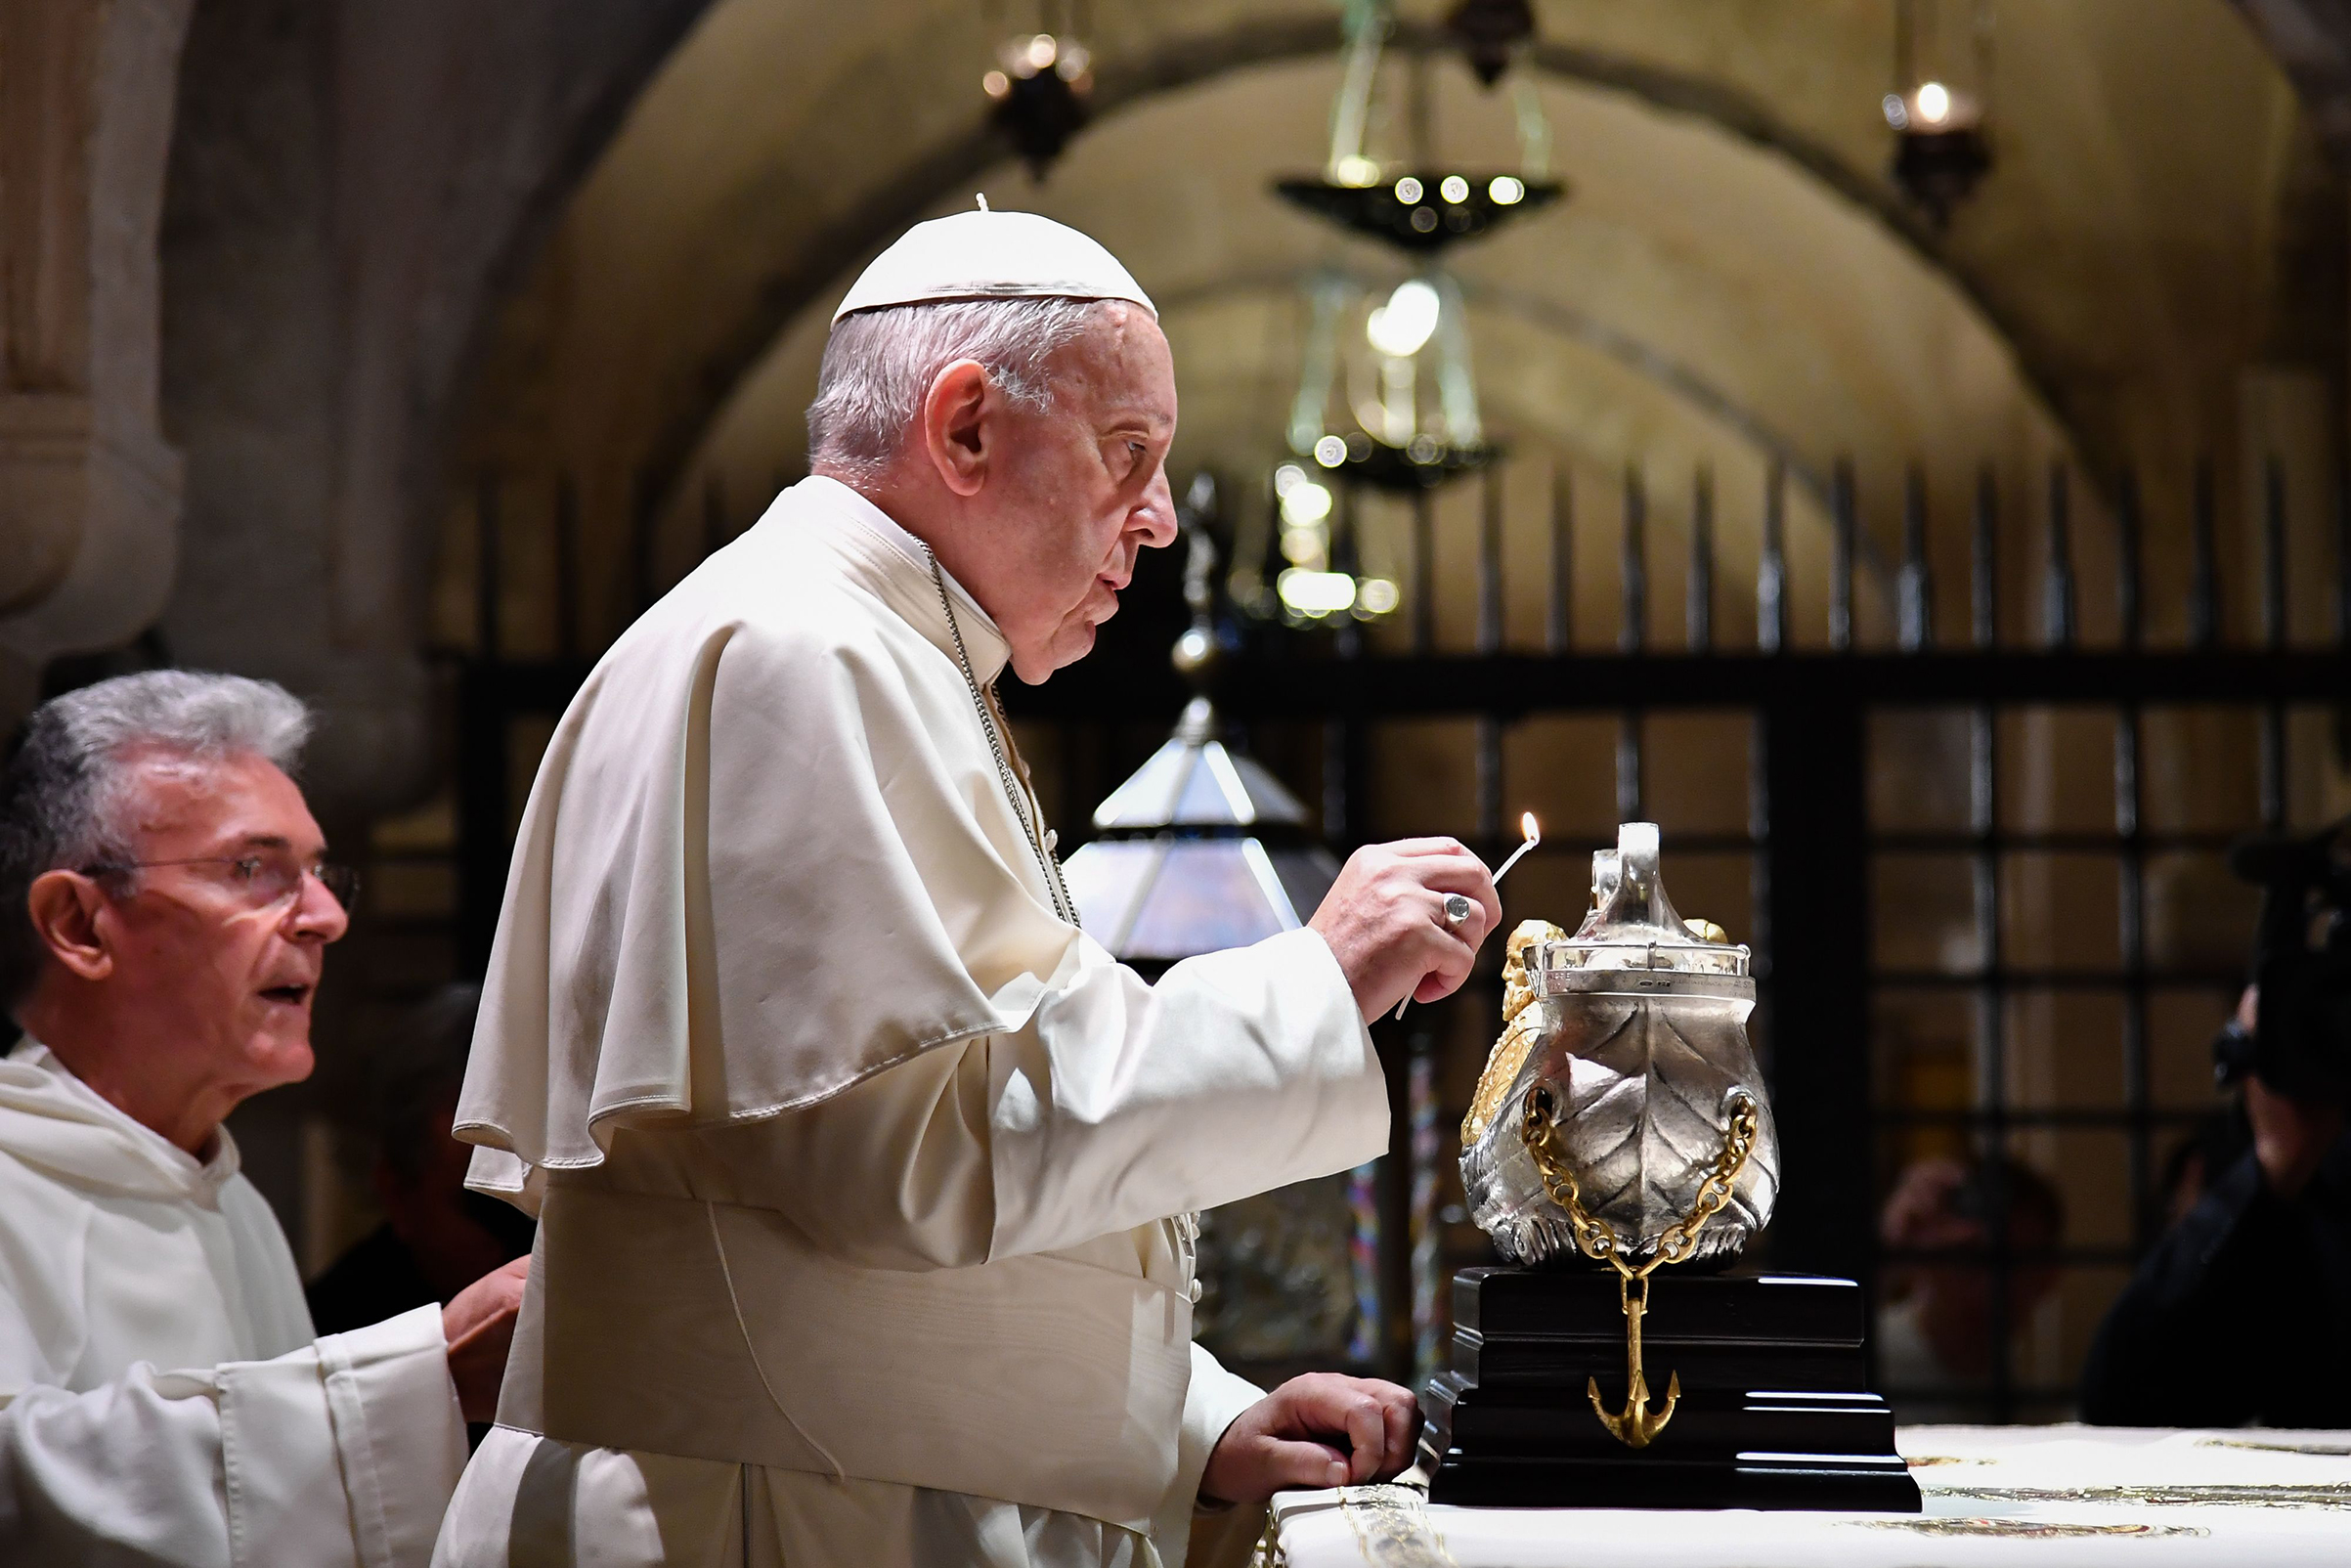 Pope Francis lights the uniflamma lamp at the tomb of Saint Nicholas in Pontifical Basilica of St Nicholas in Bari, Italy, on July 7, 2018. (Alberto Pizzoli—AFP/Getty Images)